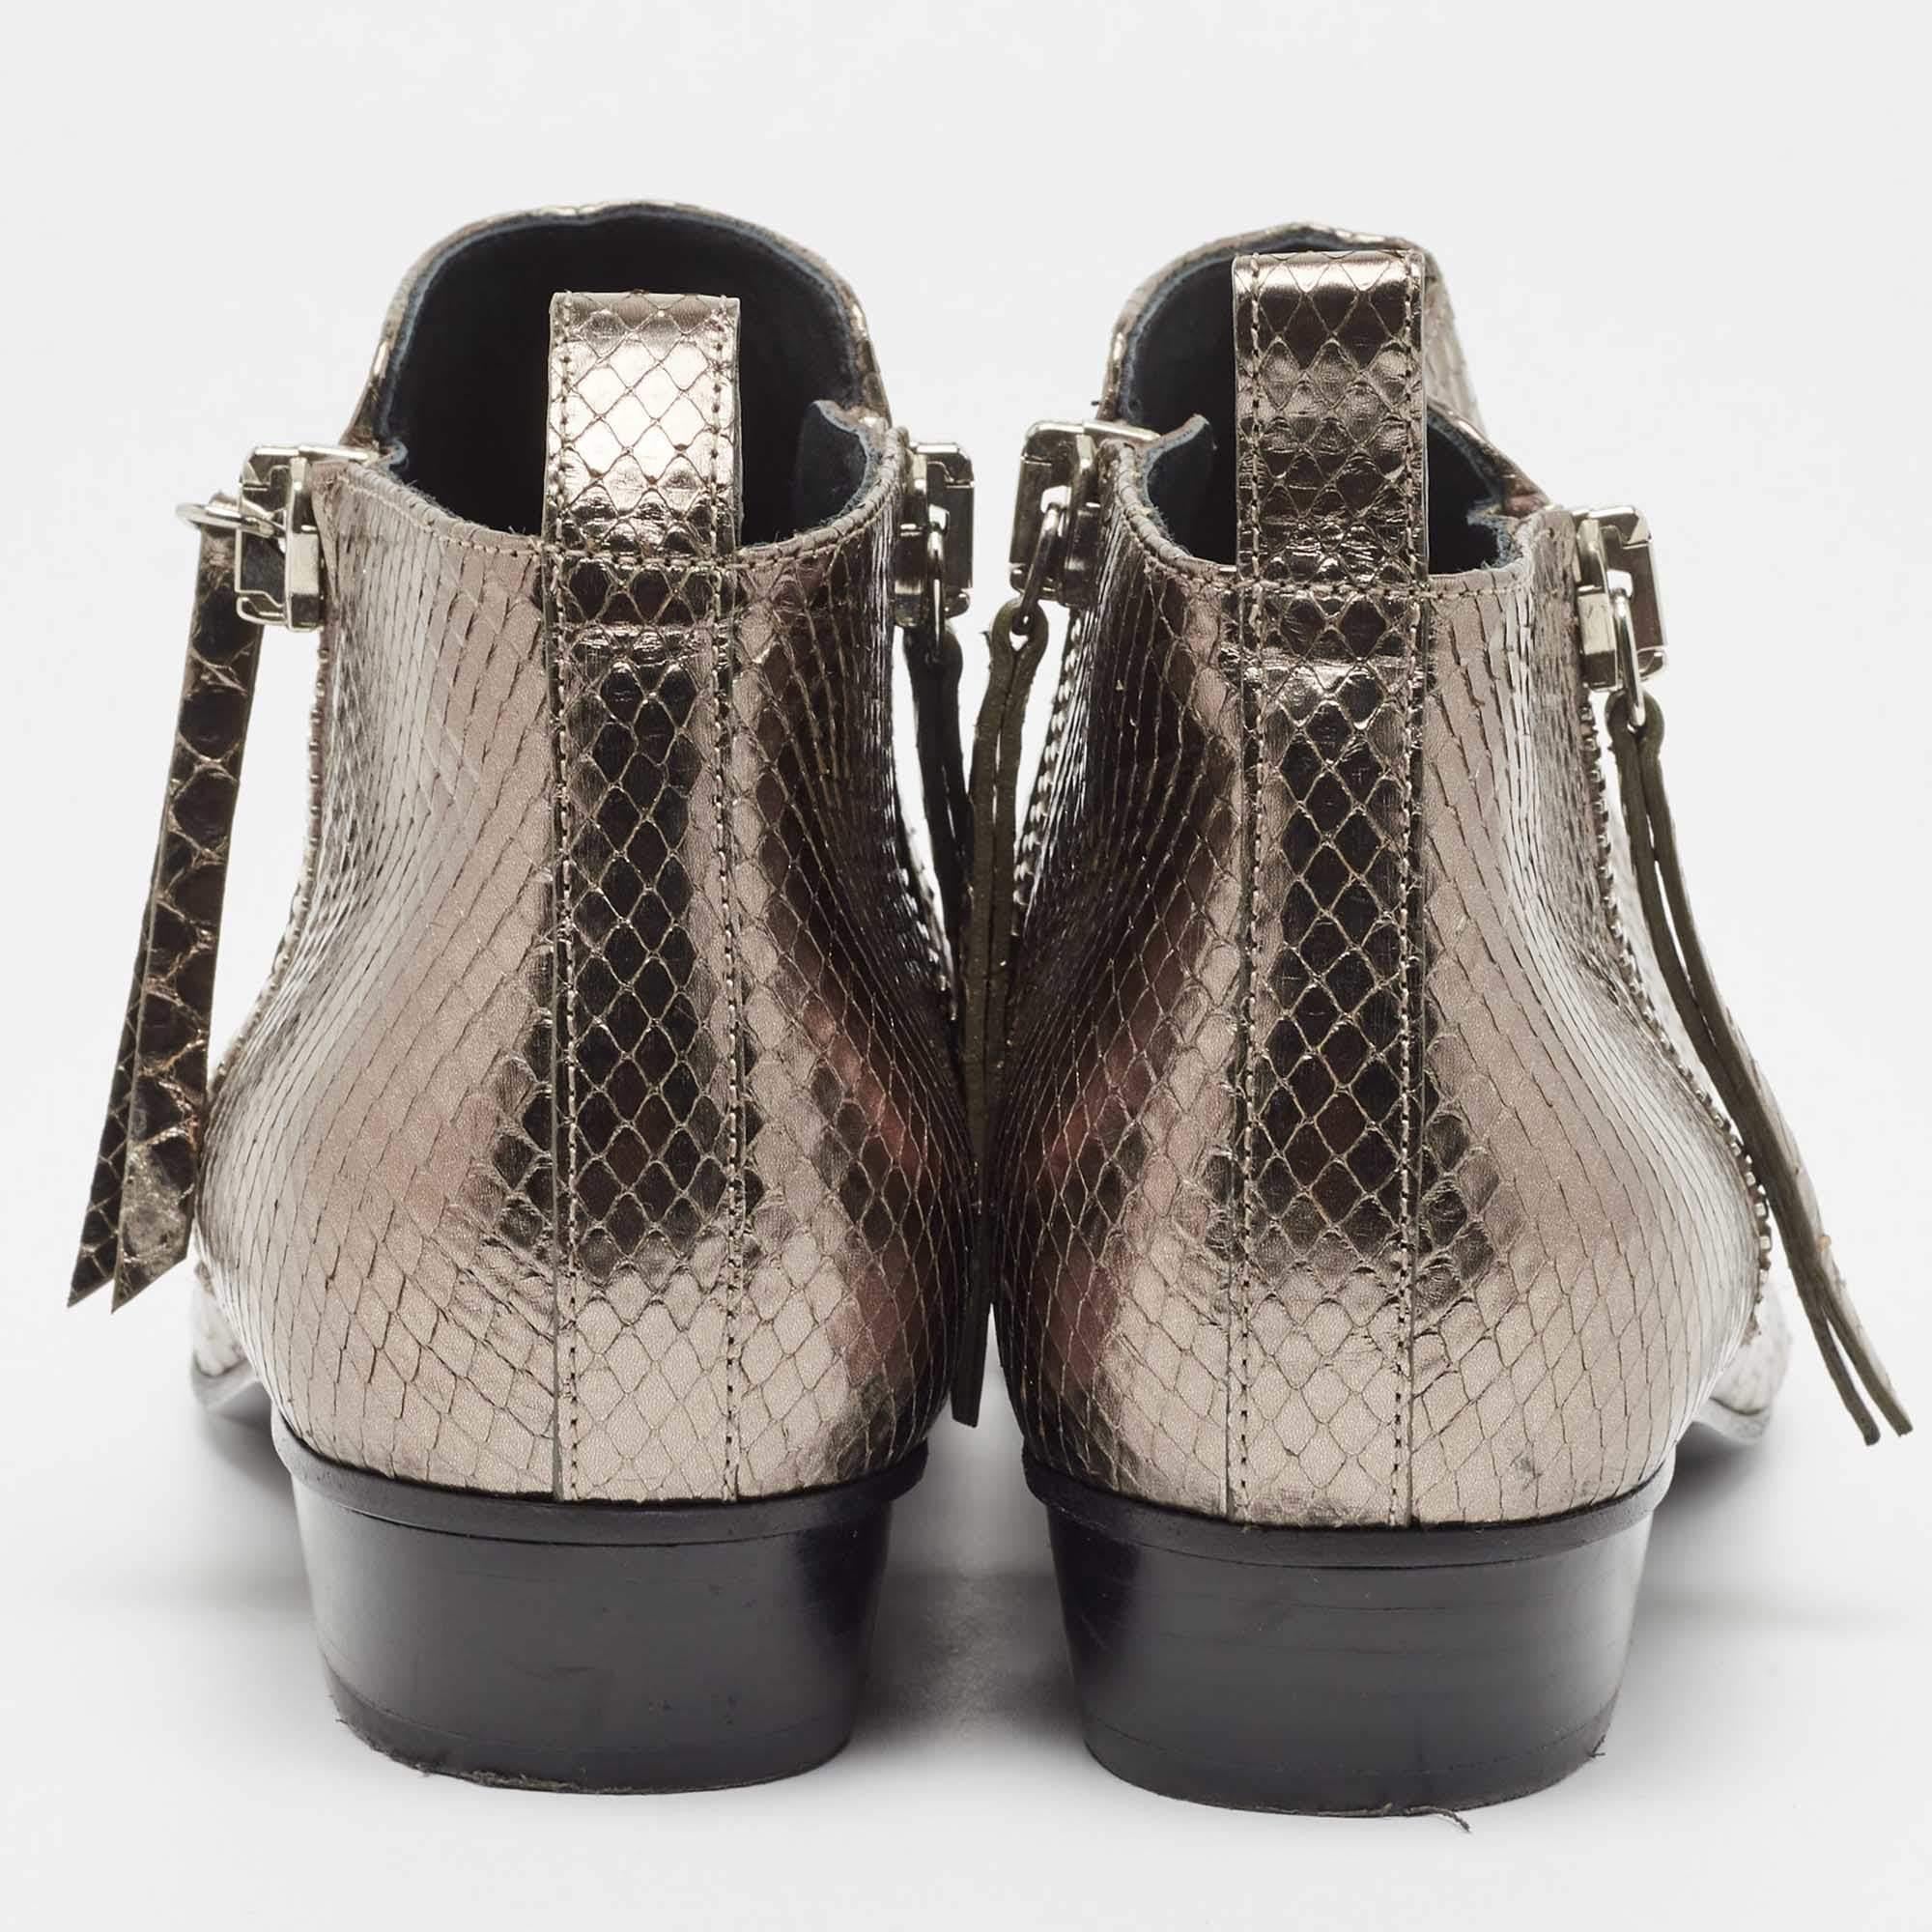  Gucci Metallic Embossed Python Ankle Boots Size 37 In Good Condition For Sale In Dubai, Al Qouz 2